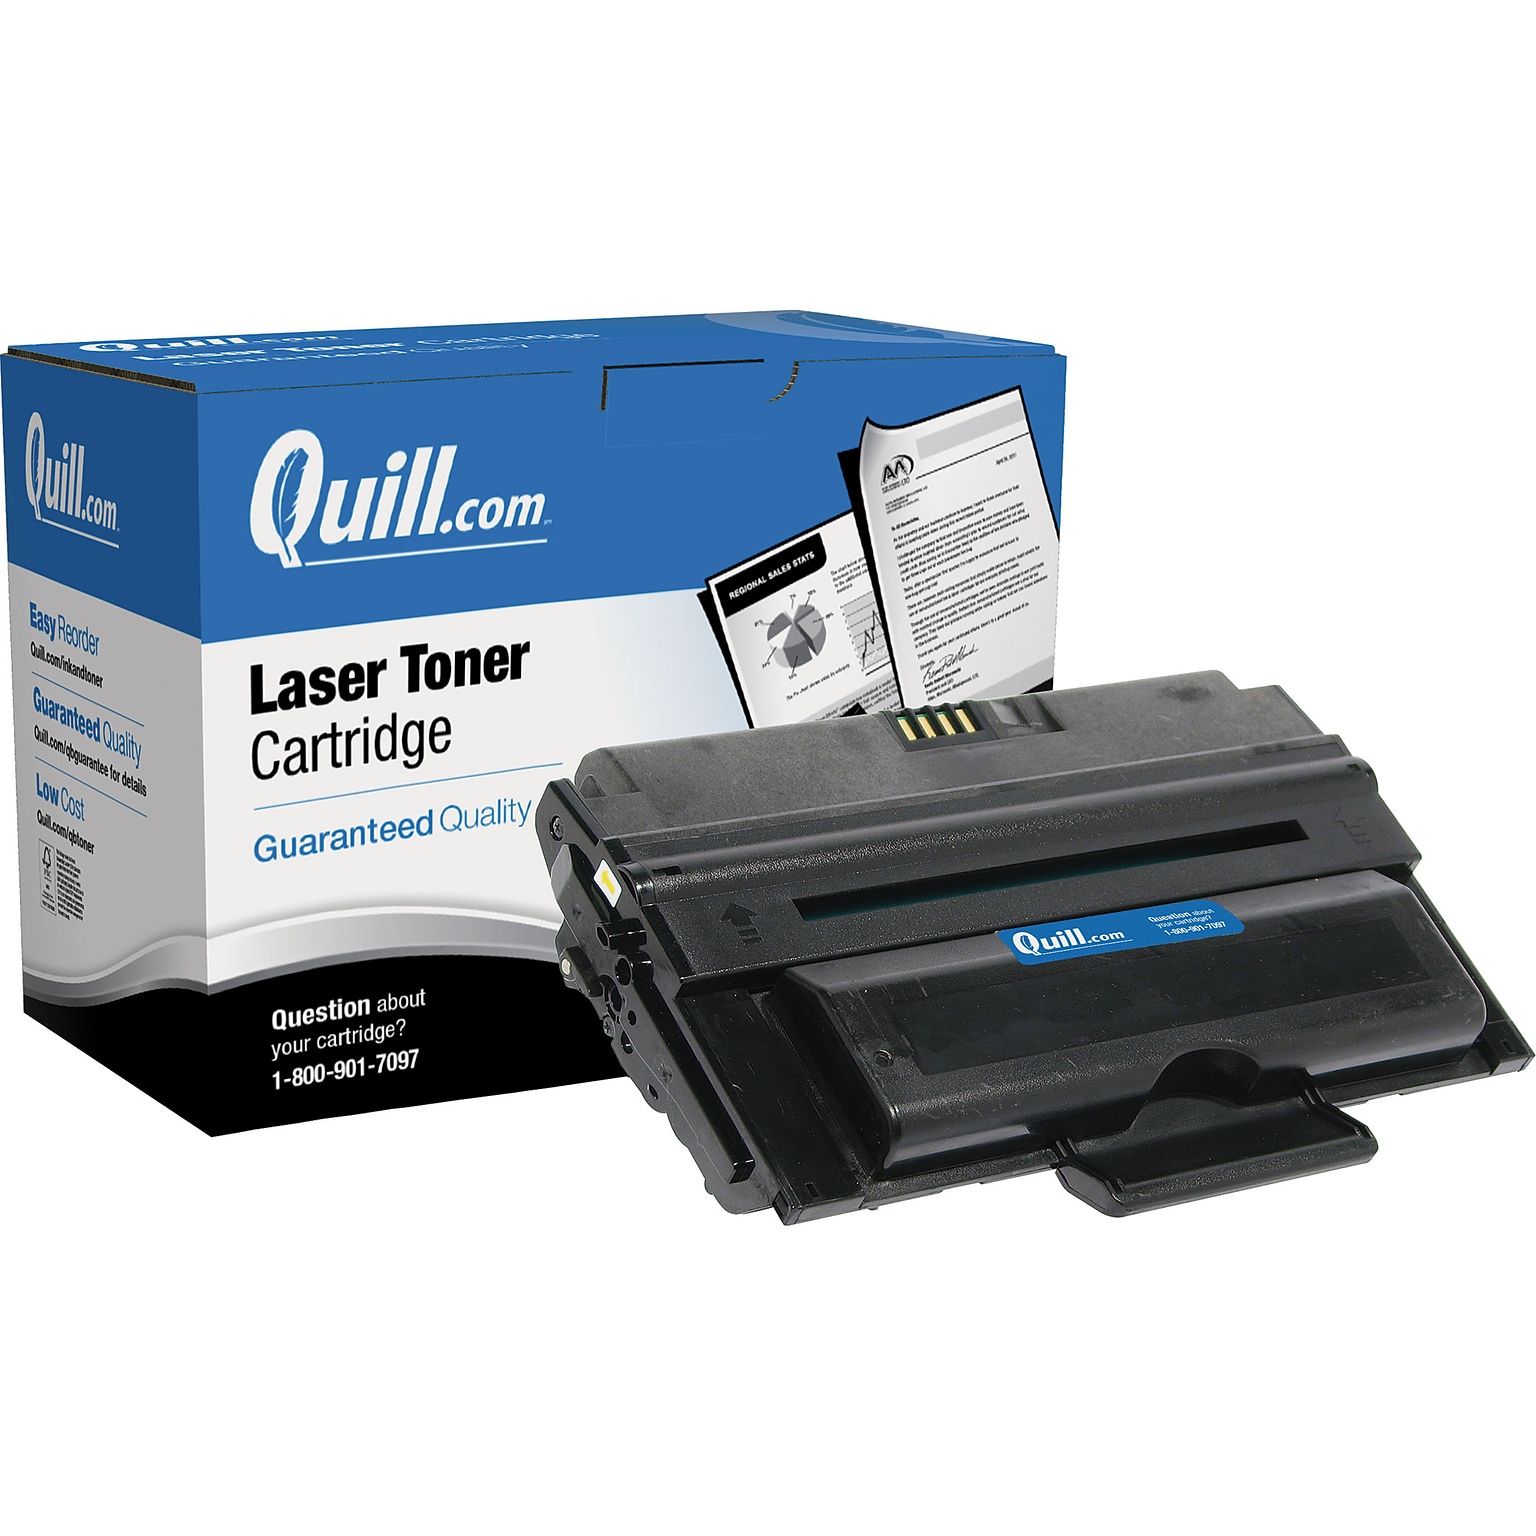 Quill Brand Remanufactured Laser Toner Cartridge for Dell™ 1815DN High Yield Black (100% Satisfaction Guaranteed)